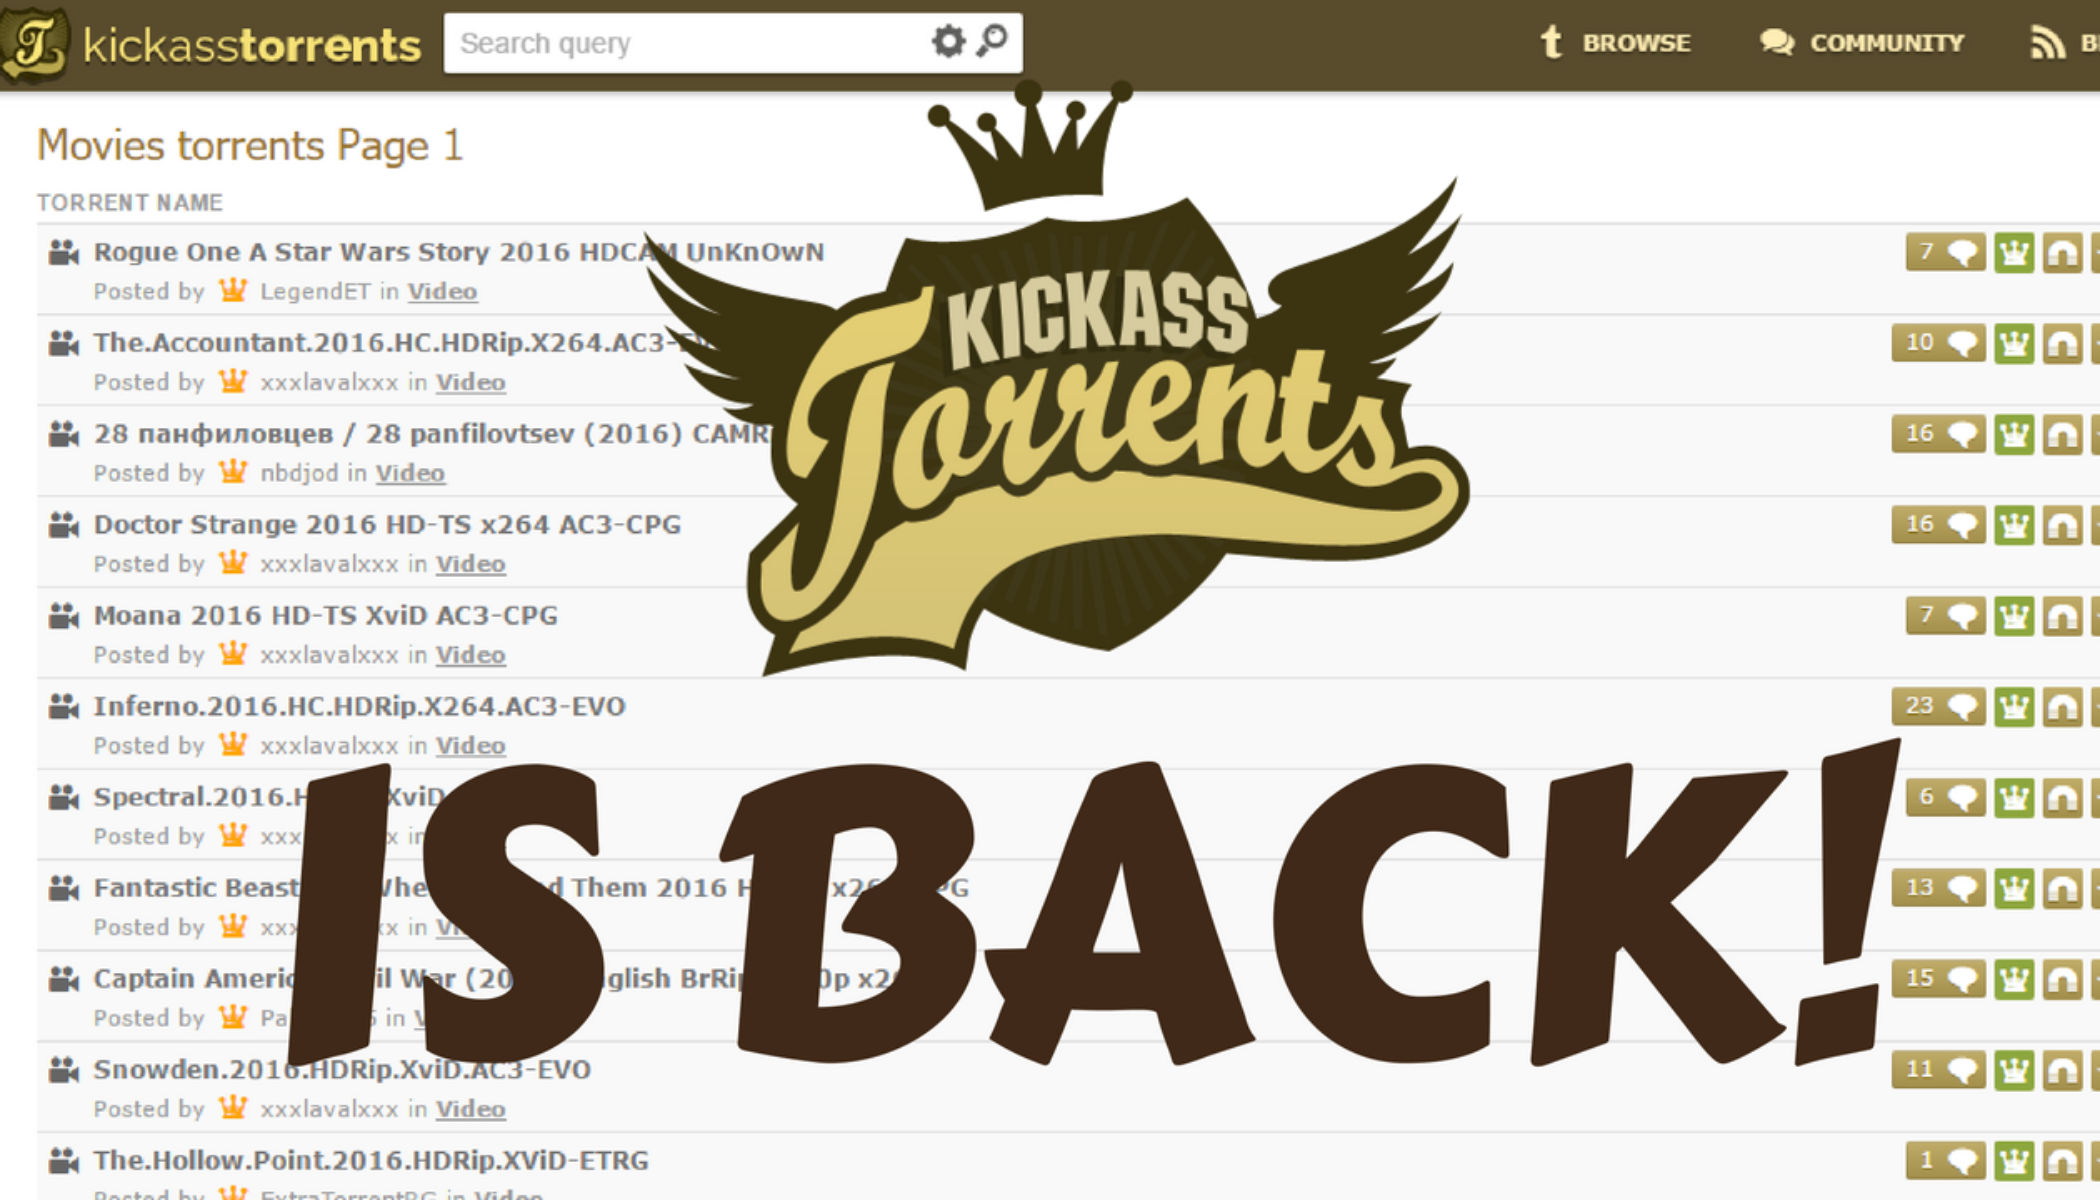 katcr is back with Torrent